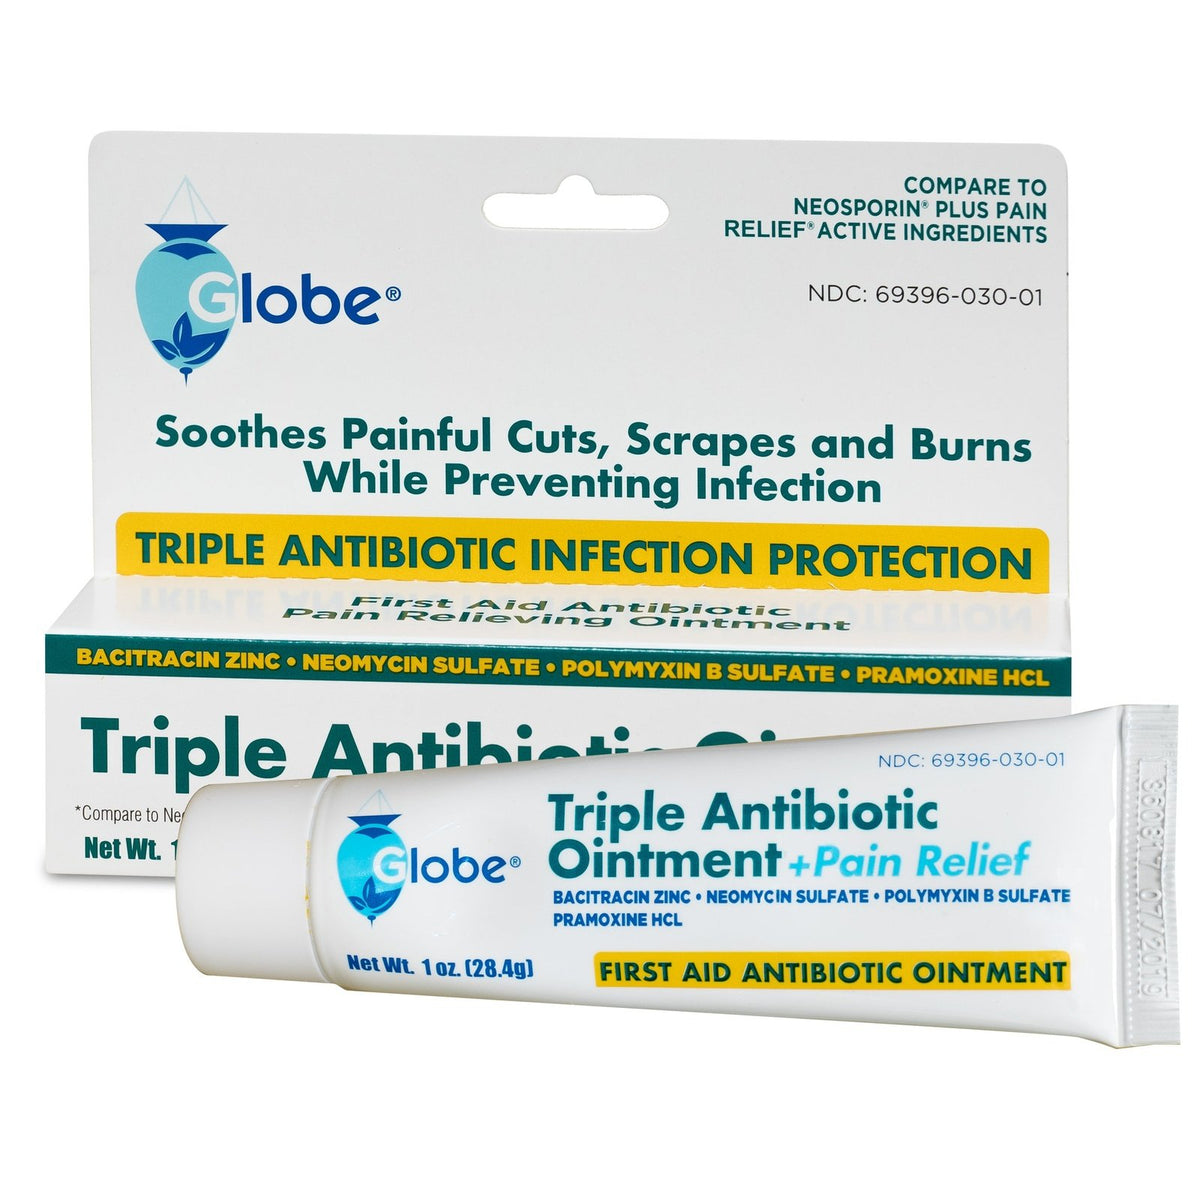 Globe Triple Antibiotic + Pain Relief Dual Action Ointment, 1 Oz (Compare to Neosporin) (1 PACK)